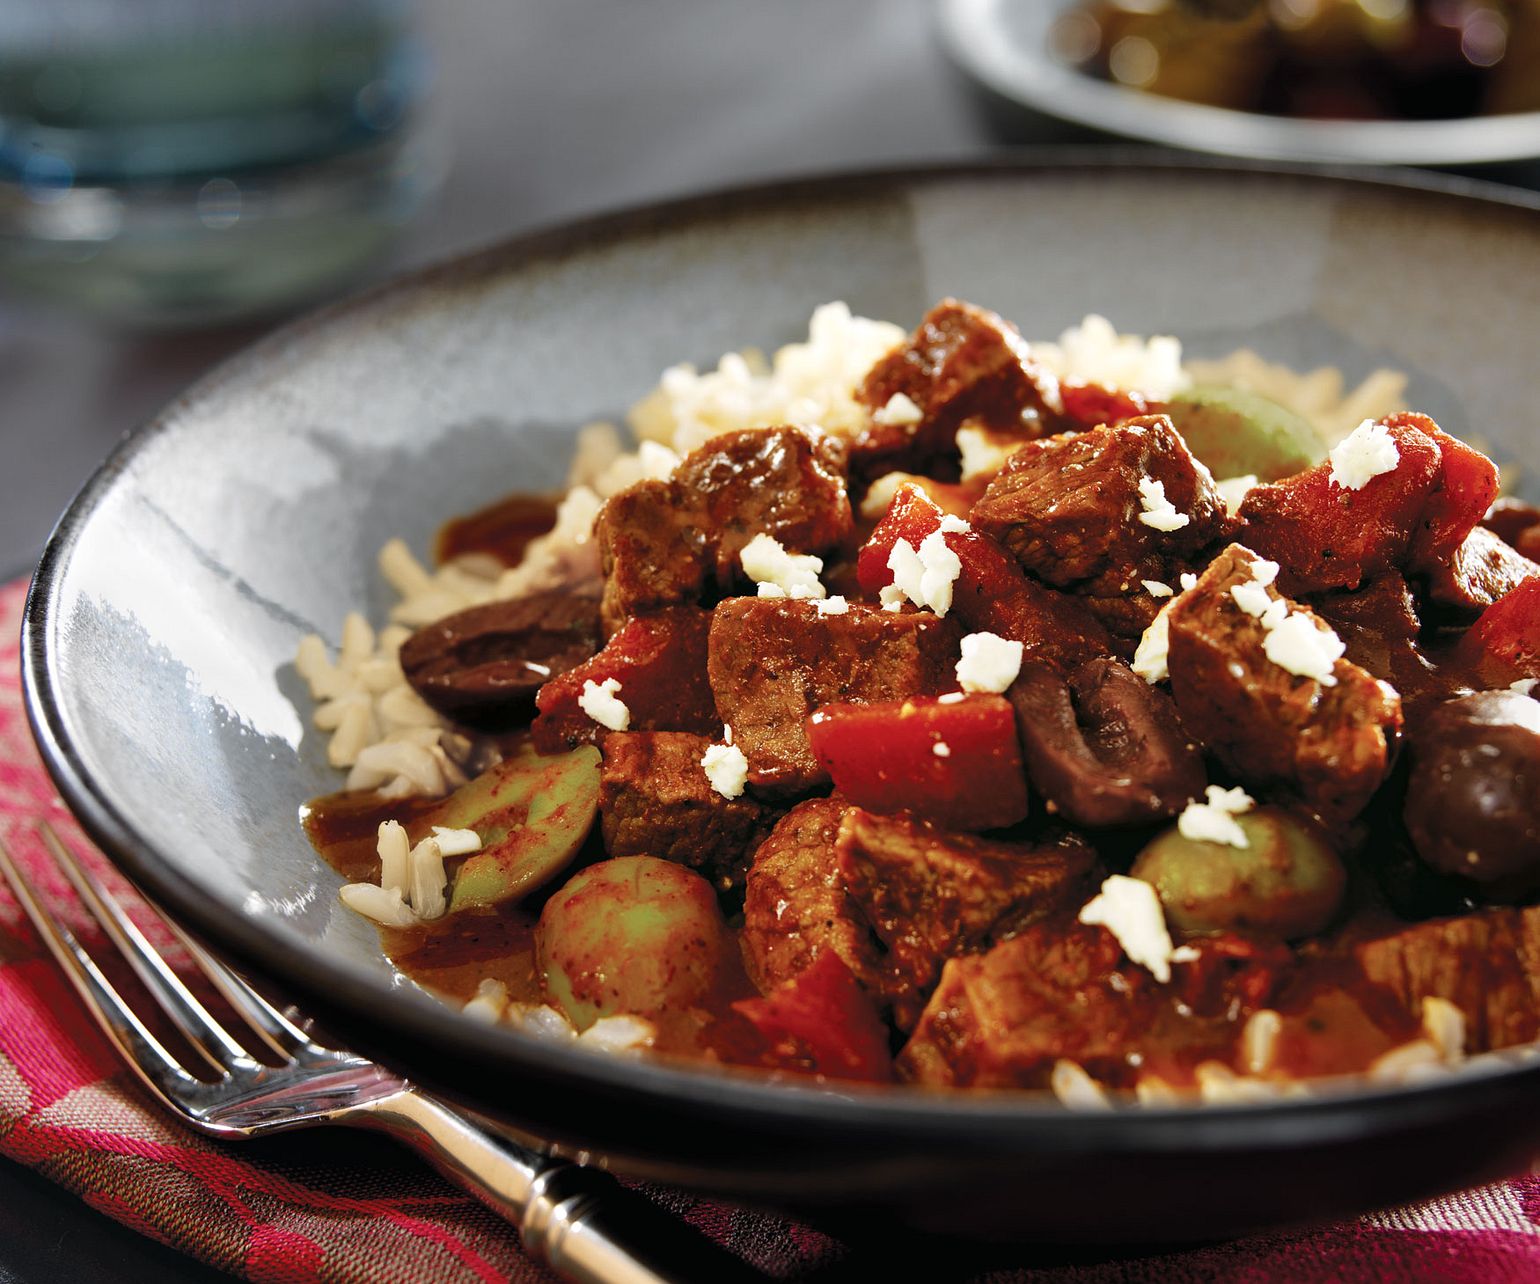 Mediterranean Beef with Mixed Olives and Feta